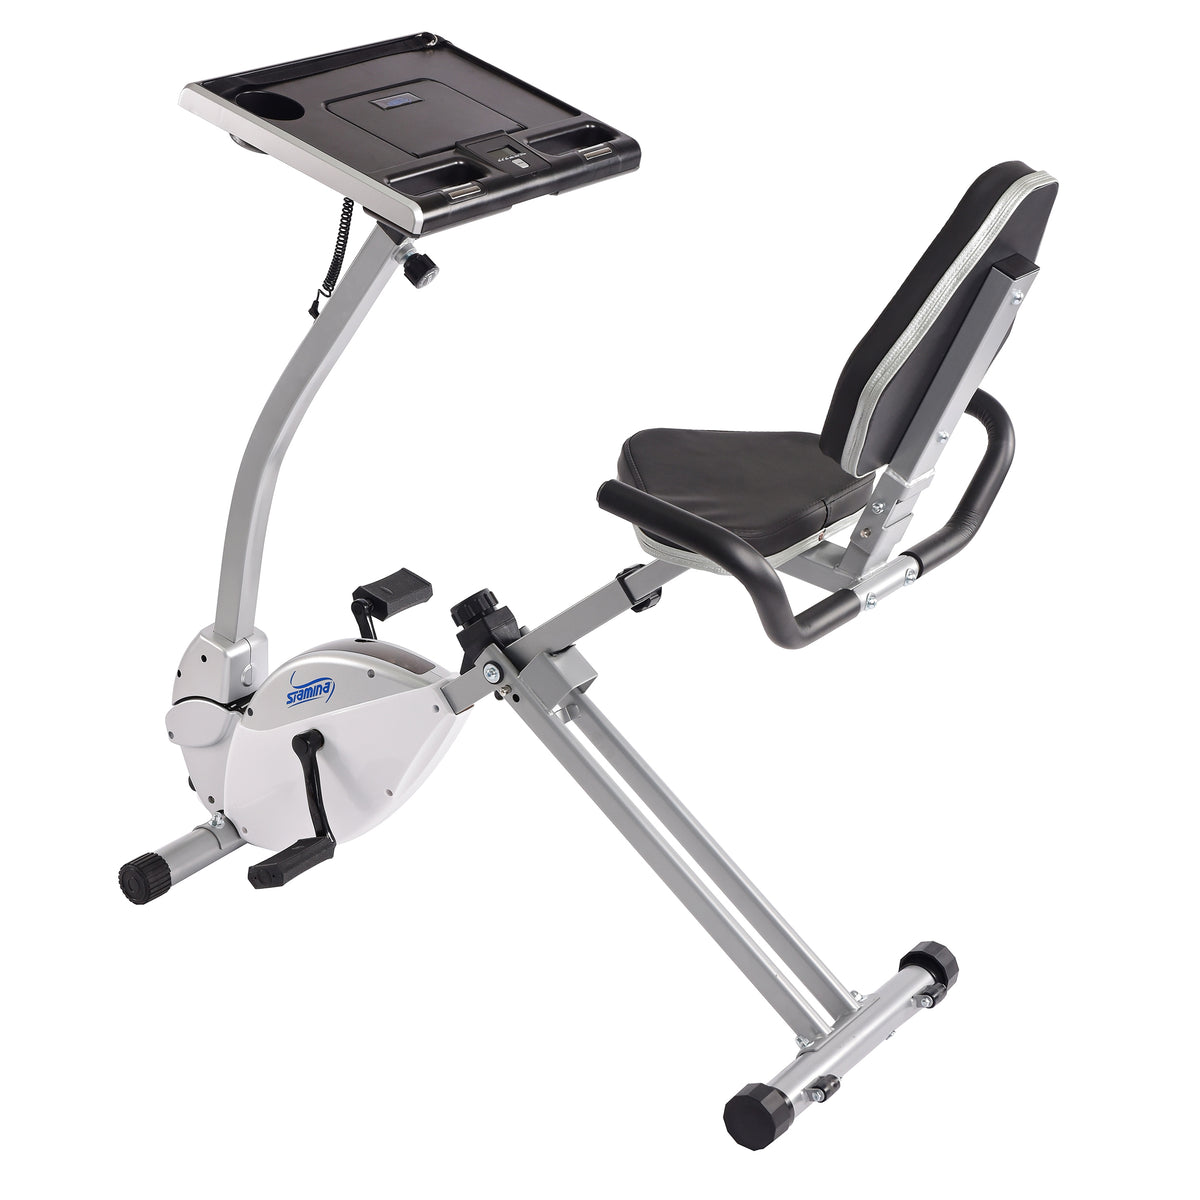 Stamina 2-in-1 Recumbent Cycling Workstation/Standing Desk